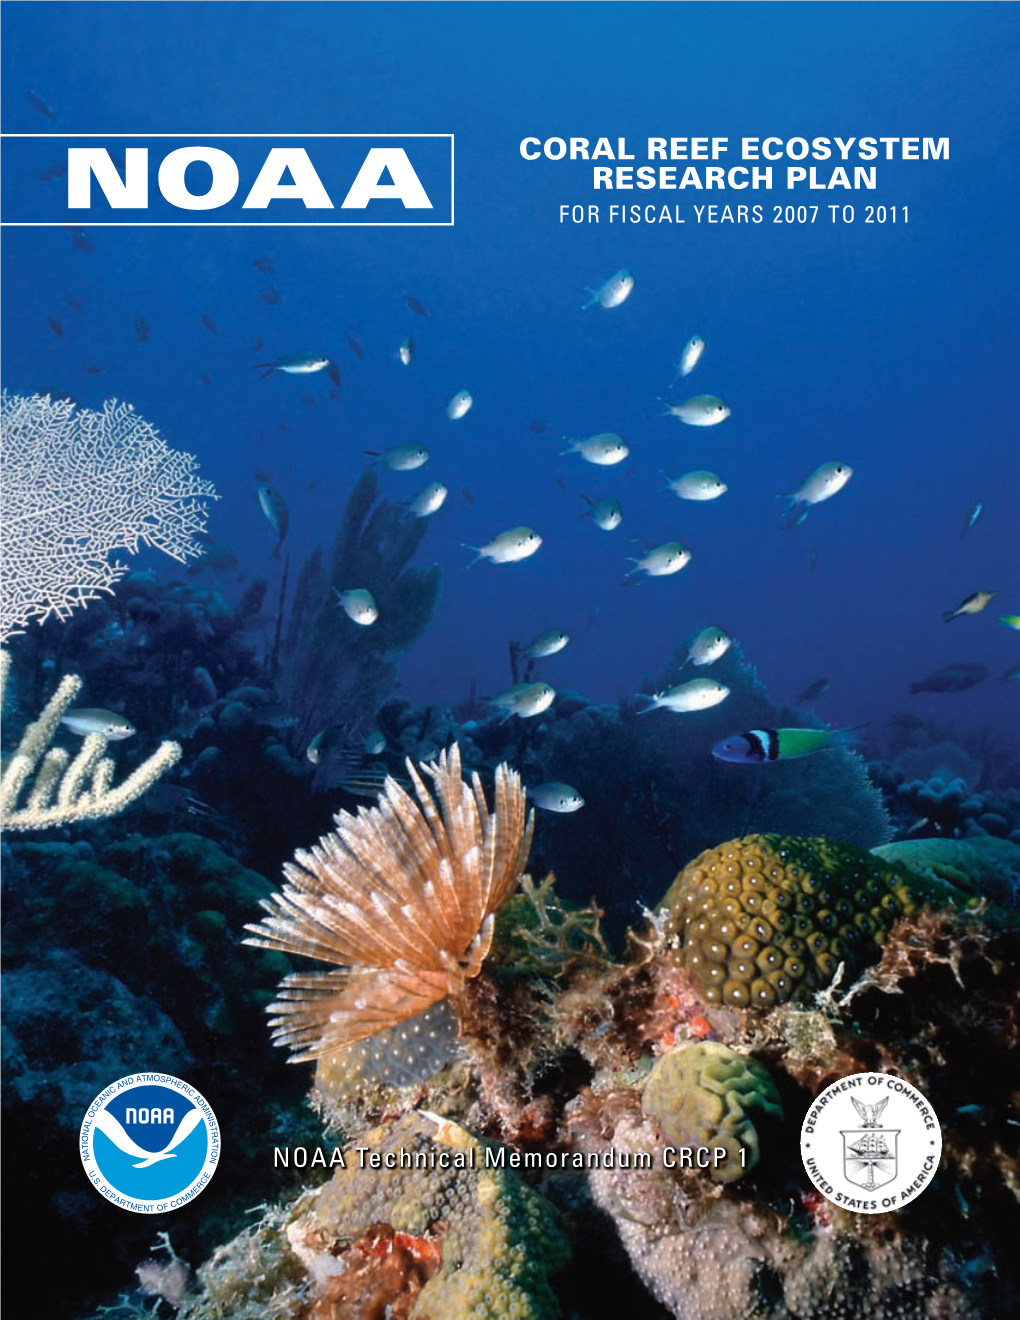 NOAA Coral Reef Ecosystem Research Plan for Fiscal Years 2007 to 2011